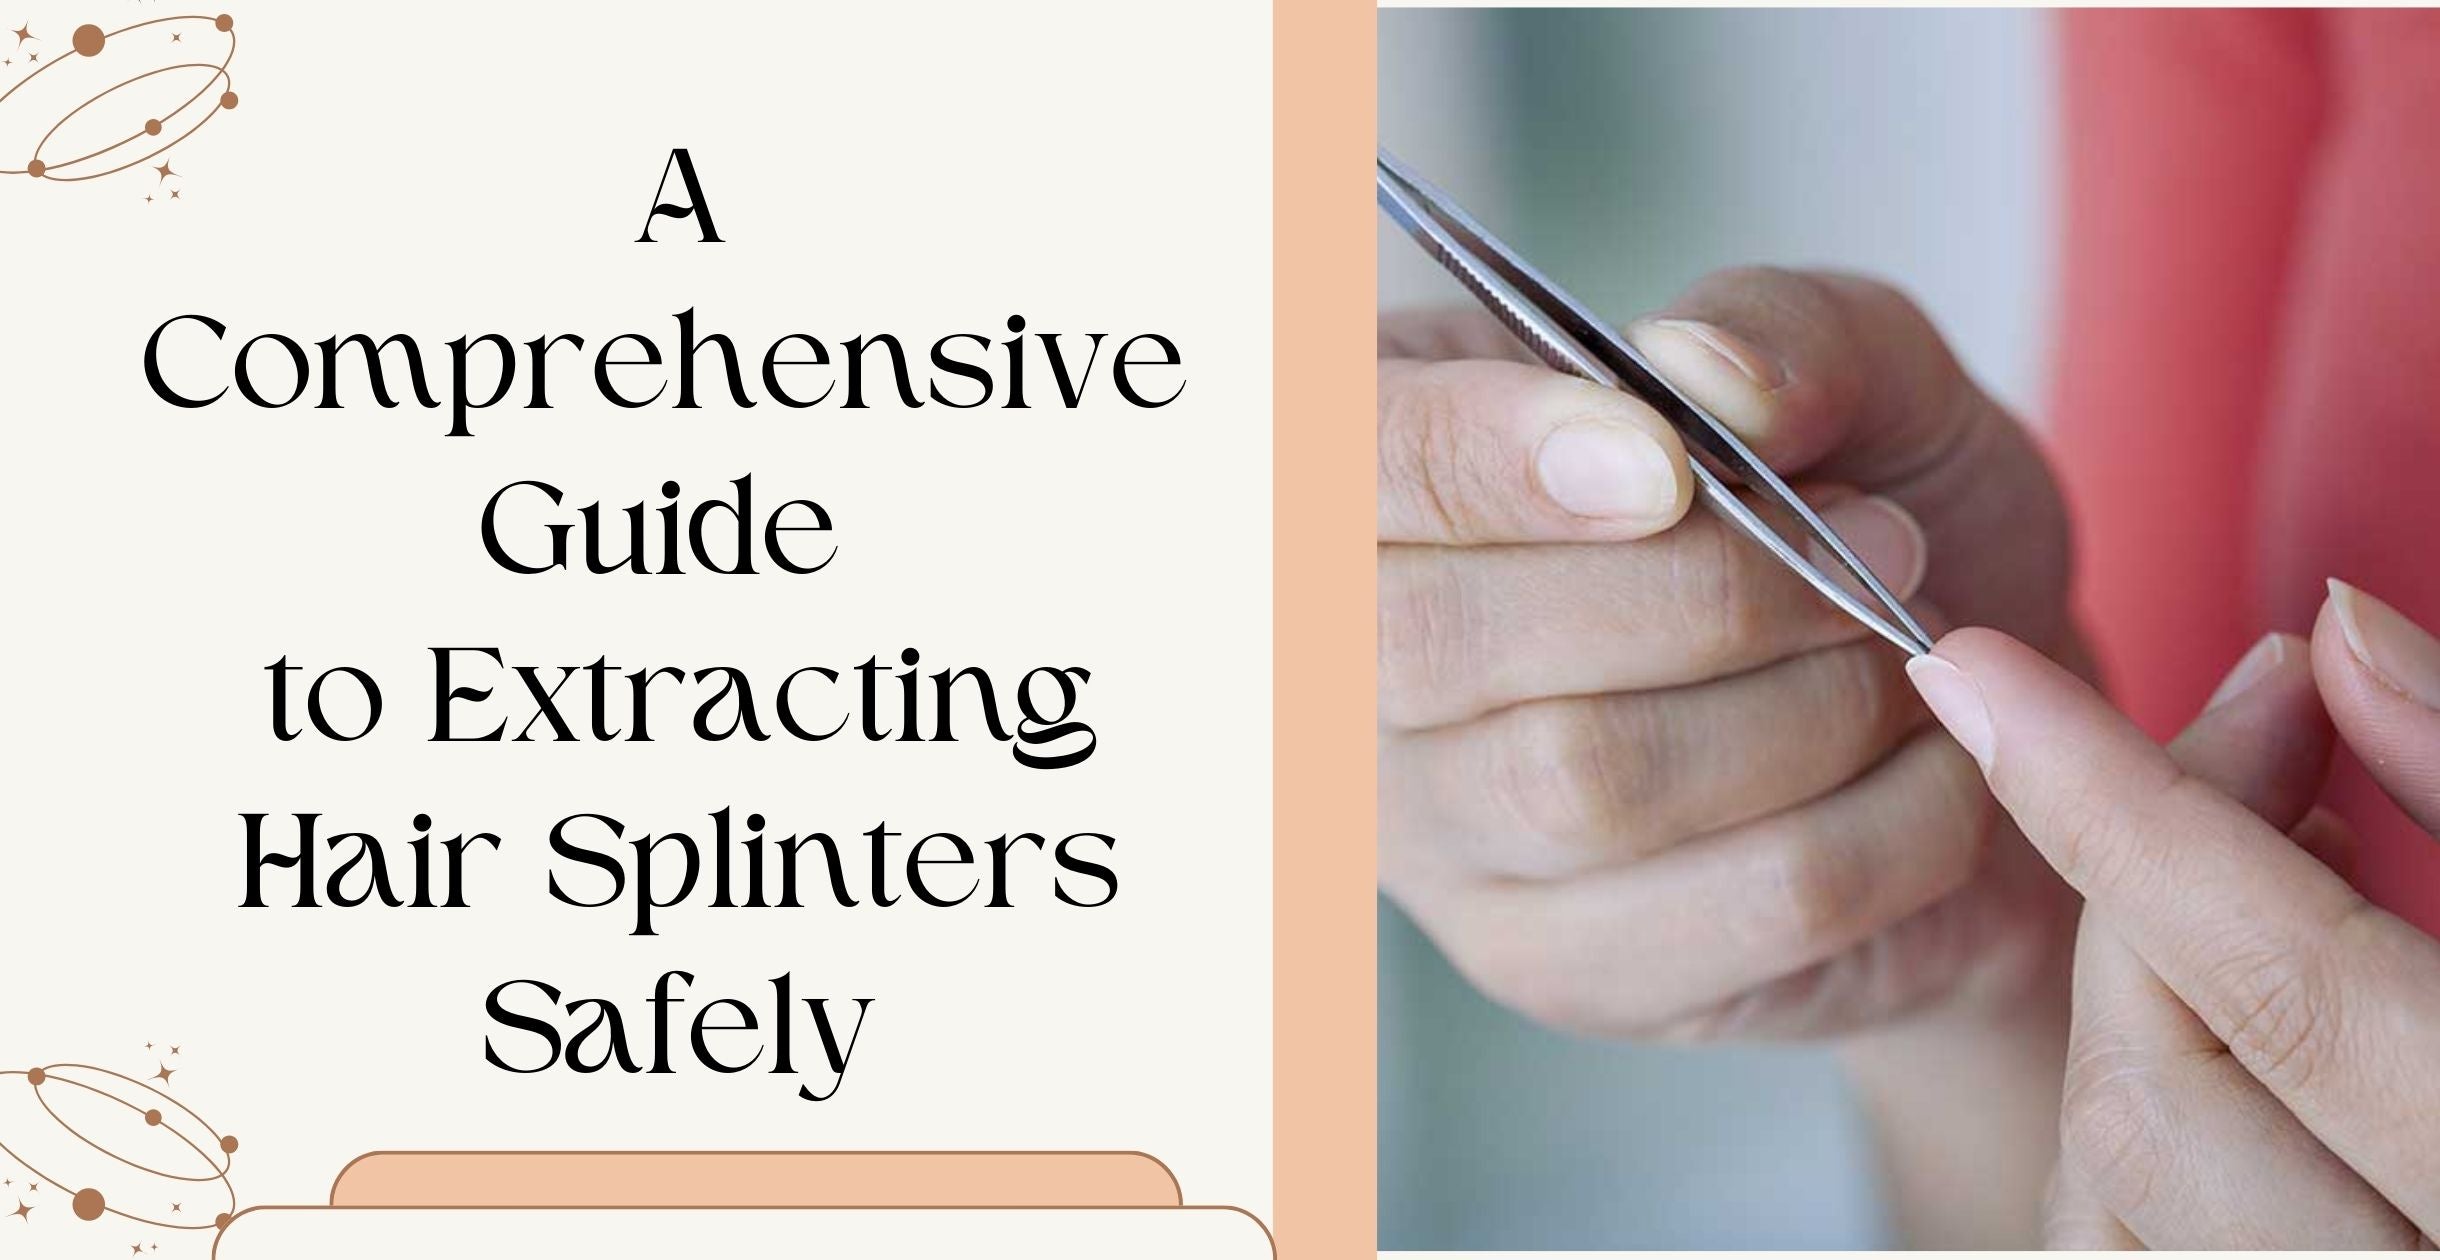 A Comprehensive Guide to Extracting Hair Splinters Safely